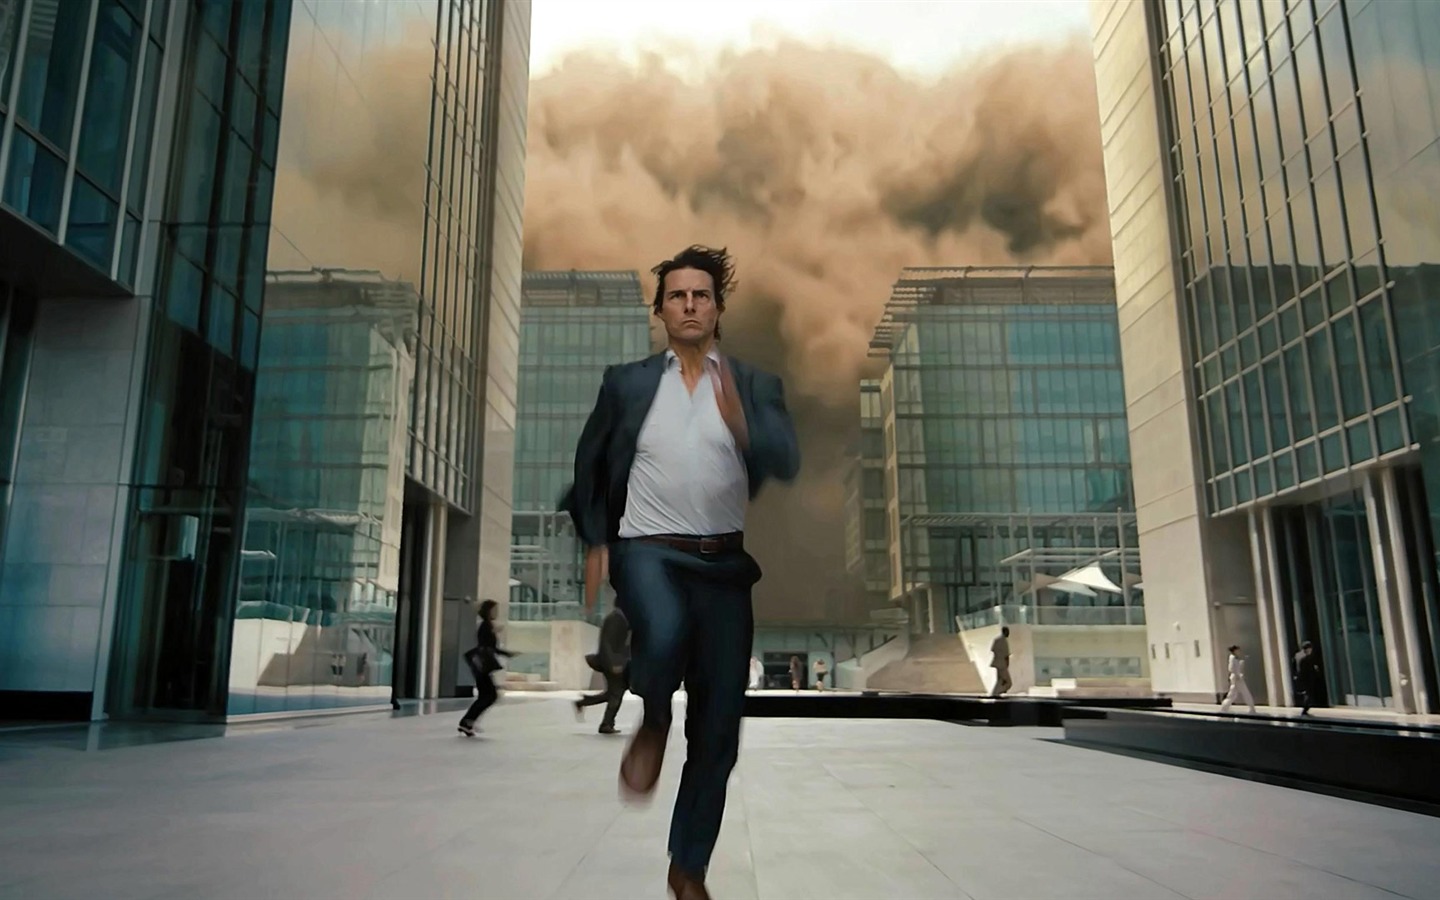 Mission: Impossible - Ghost Protocol 碟中谍4 高清壁纸11 - 1440x900